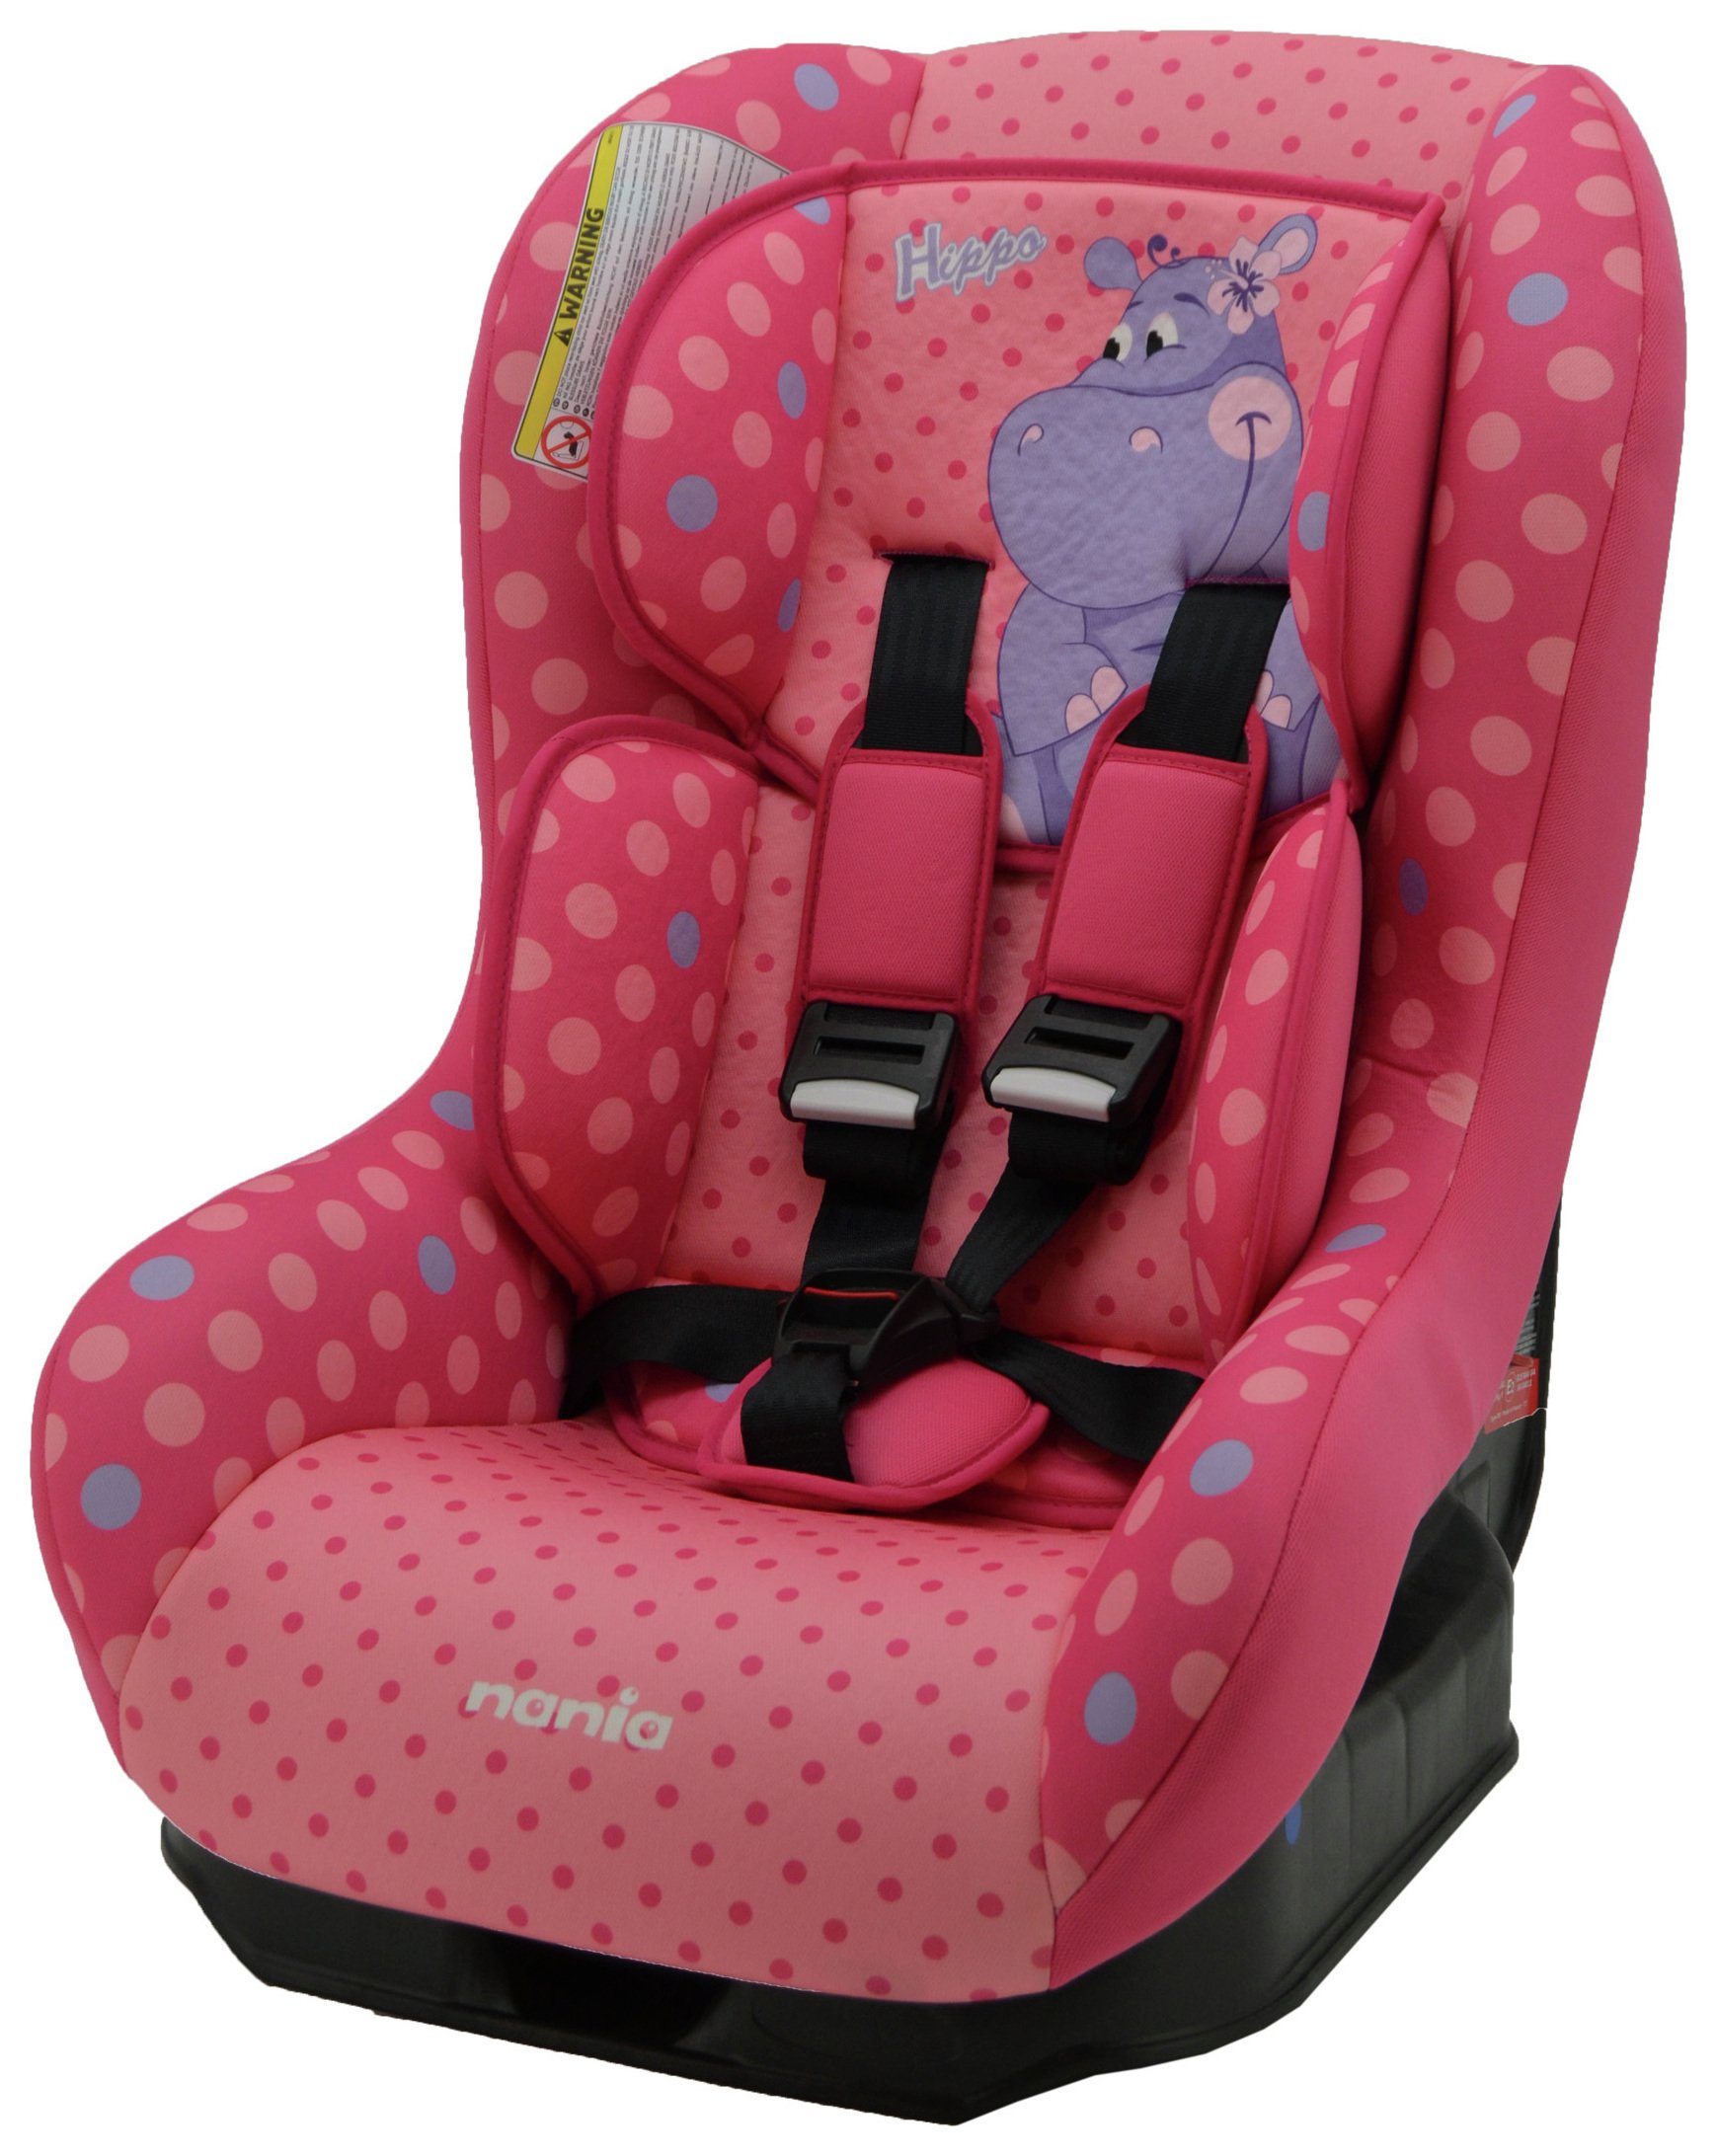 Driver Hippo Group 0+/1 Car Seat Review